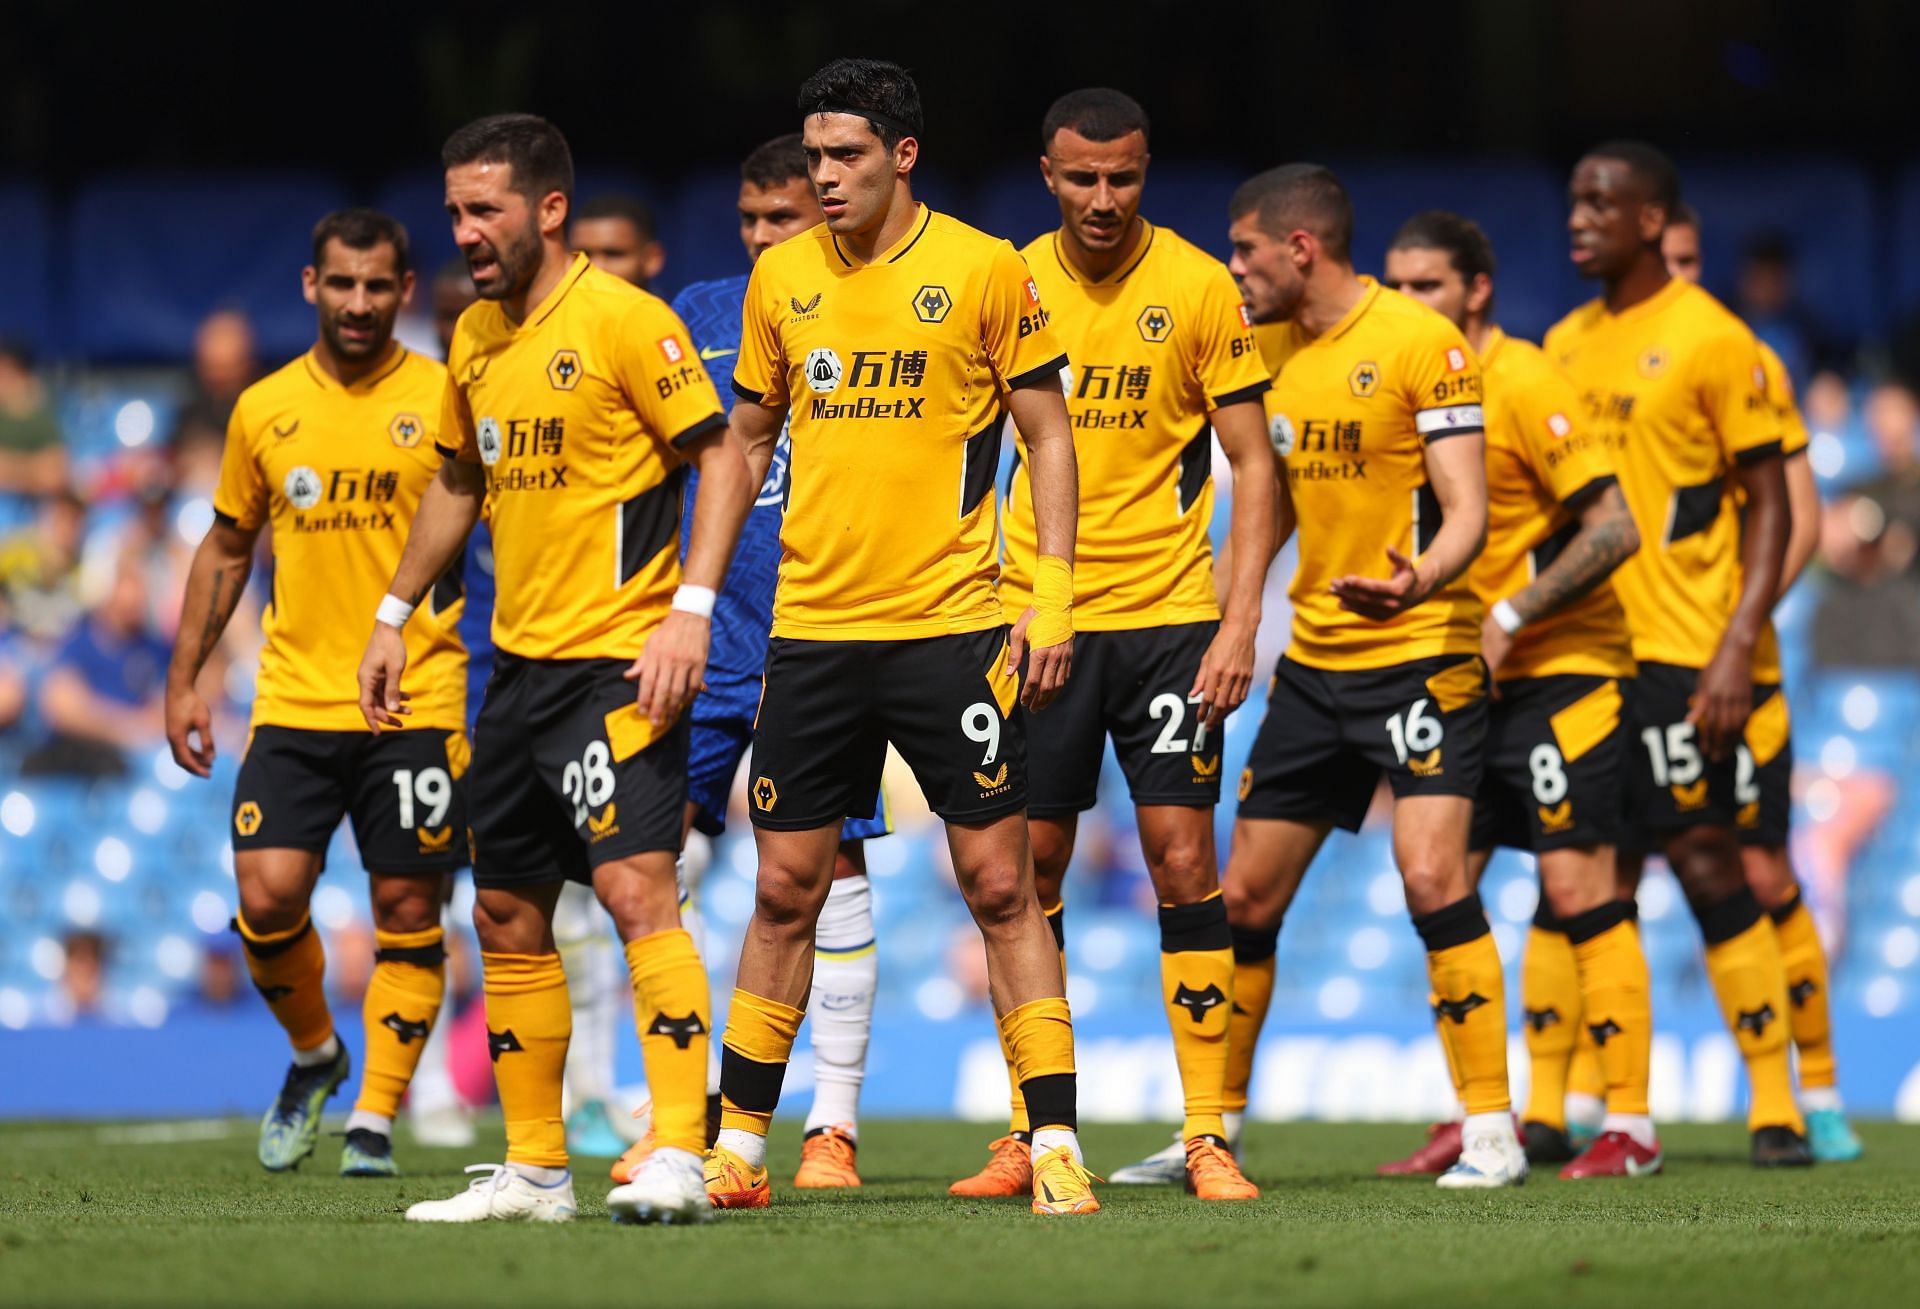 Wolves will be looking to continue their strong form with a win against Alaves on Wednesday